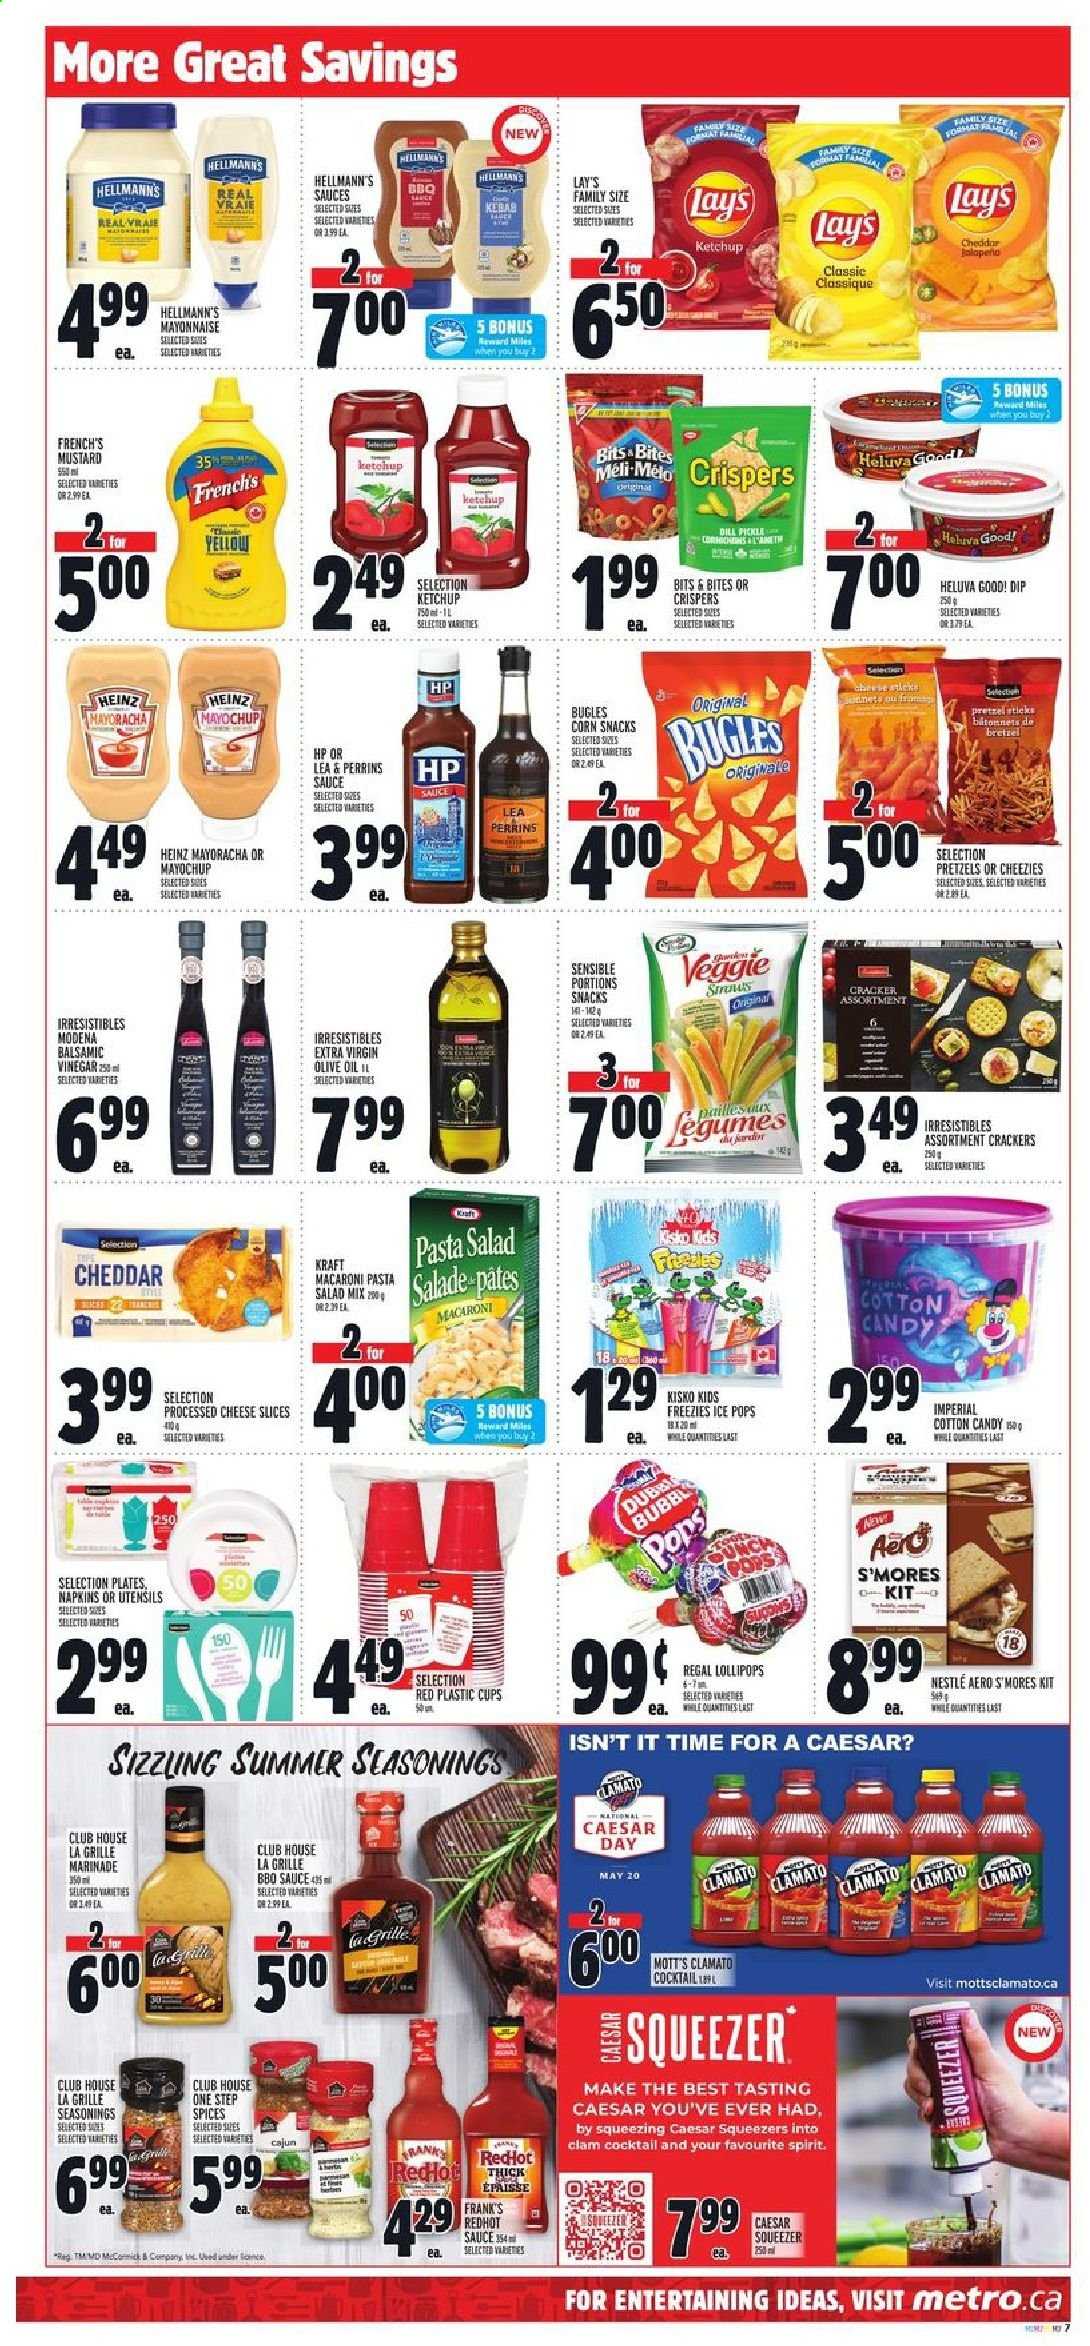 thumbnail - Metro Flyer - May 13, 2021 - May 19, 2021 - Sales products - pretzels, salad, jalapeño, Mott's, clams, macaroni, pasta, Kraft®, pasta salad, sliced cheese, cheddar, cheese, dip, Hellmann’s, snack, cotton candy, crackers, lollipop, dill pickle, Lay’s, Heinz, dill, mustard, marinade, balsamic vinegar, extra virgin olive oil, vinegar, olive oil, oil, Clamato, napkins, utensils, plate, cup, squeezer, Nestlé. Page 10.